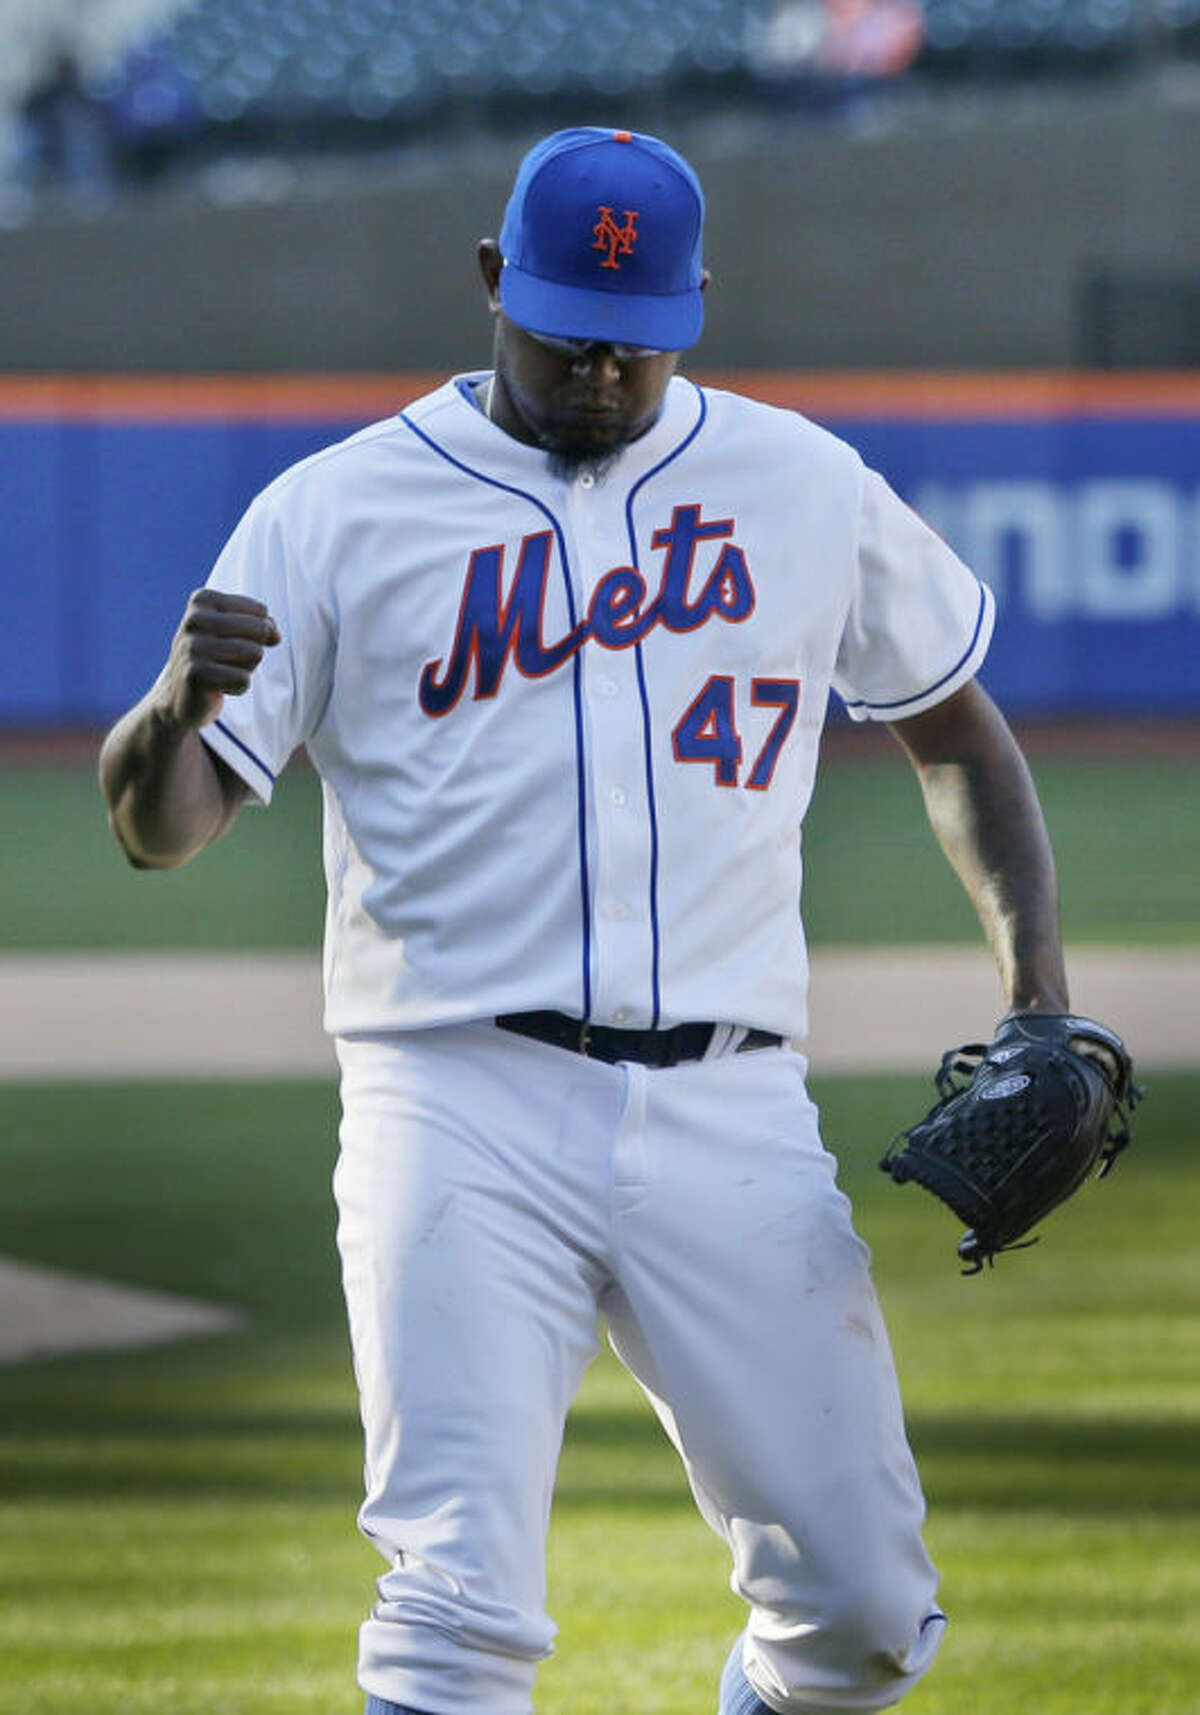 New York Mets relief pitcher Jose Valverde reacts after the Mets turned a double play to end the top of the fourteenth inning of the baseball game against the Atlanta Braves at Citi Field, Sunday, April 20, 2014 in New York. The Mets defeated the Braves in extra innings 4-3. (AP Photo/Seth Wenig)